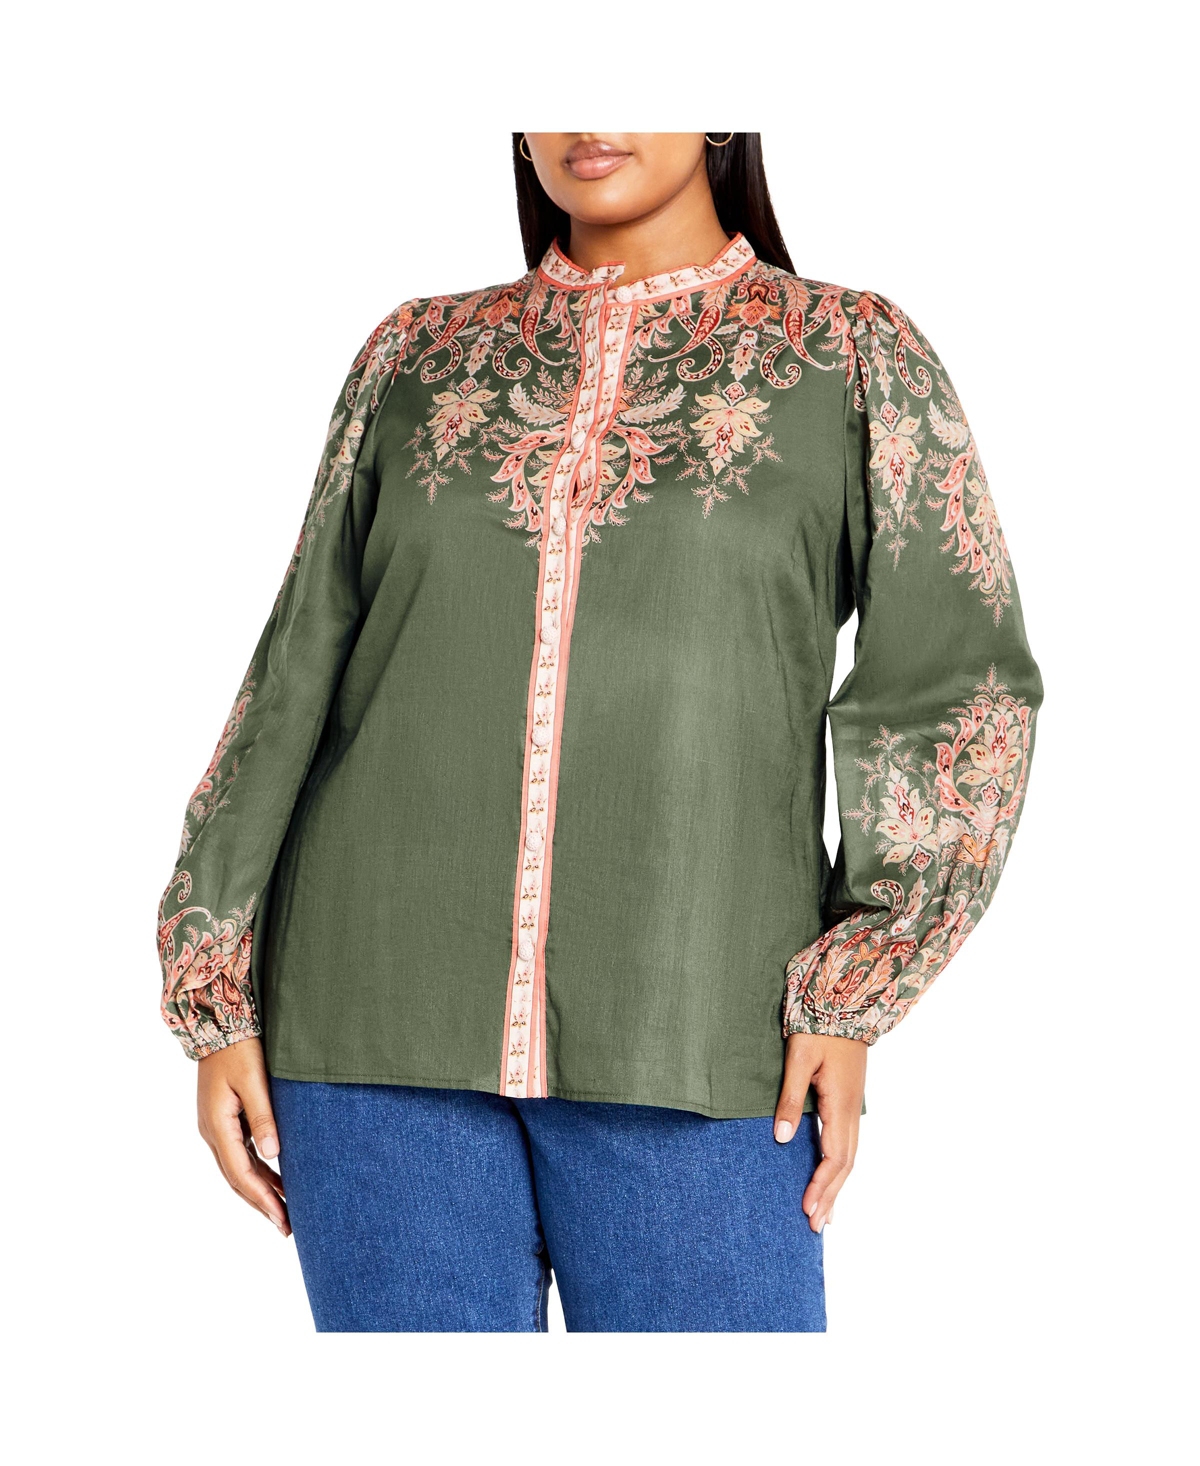 Plus Size Chloe Placement Shirt - Ivory placement